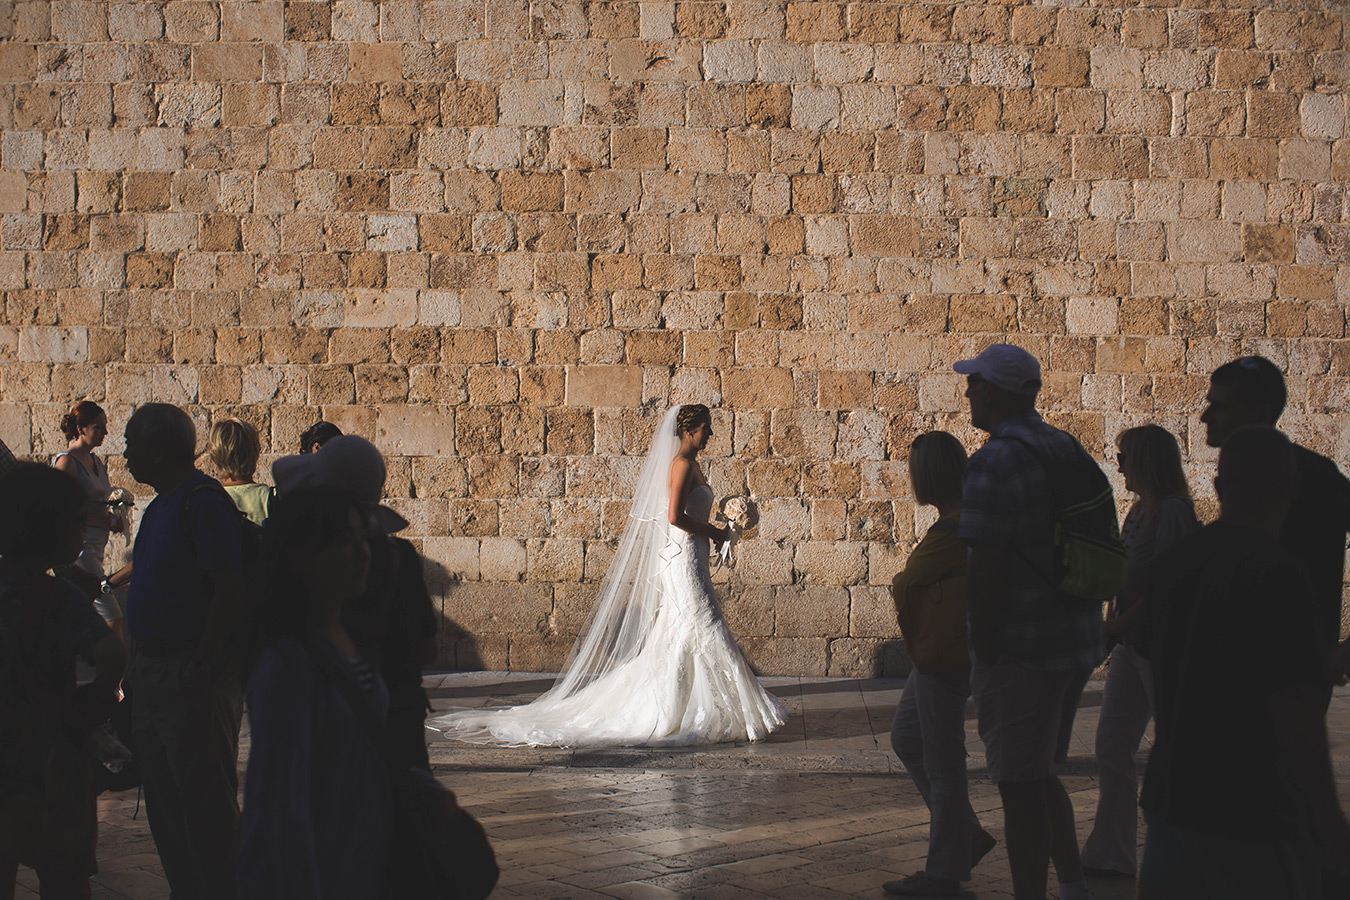 One of a set of images taken at this chic destination Wedding of Jenna & Nick. The stylish old town of Dubrovnik, Croatia.  The Bride walks down the street.  Photography by Matt Porteous